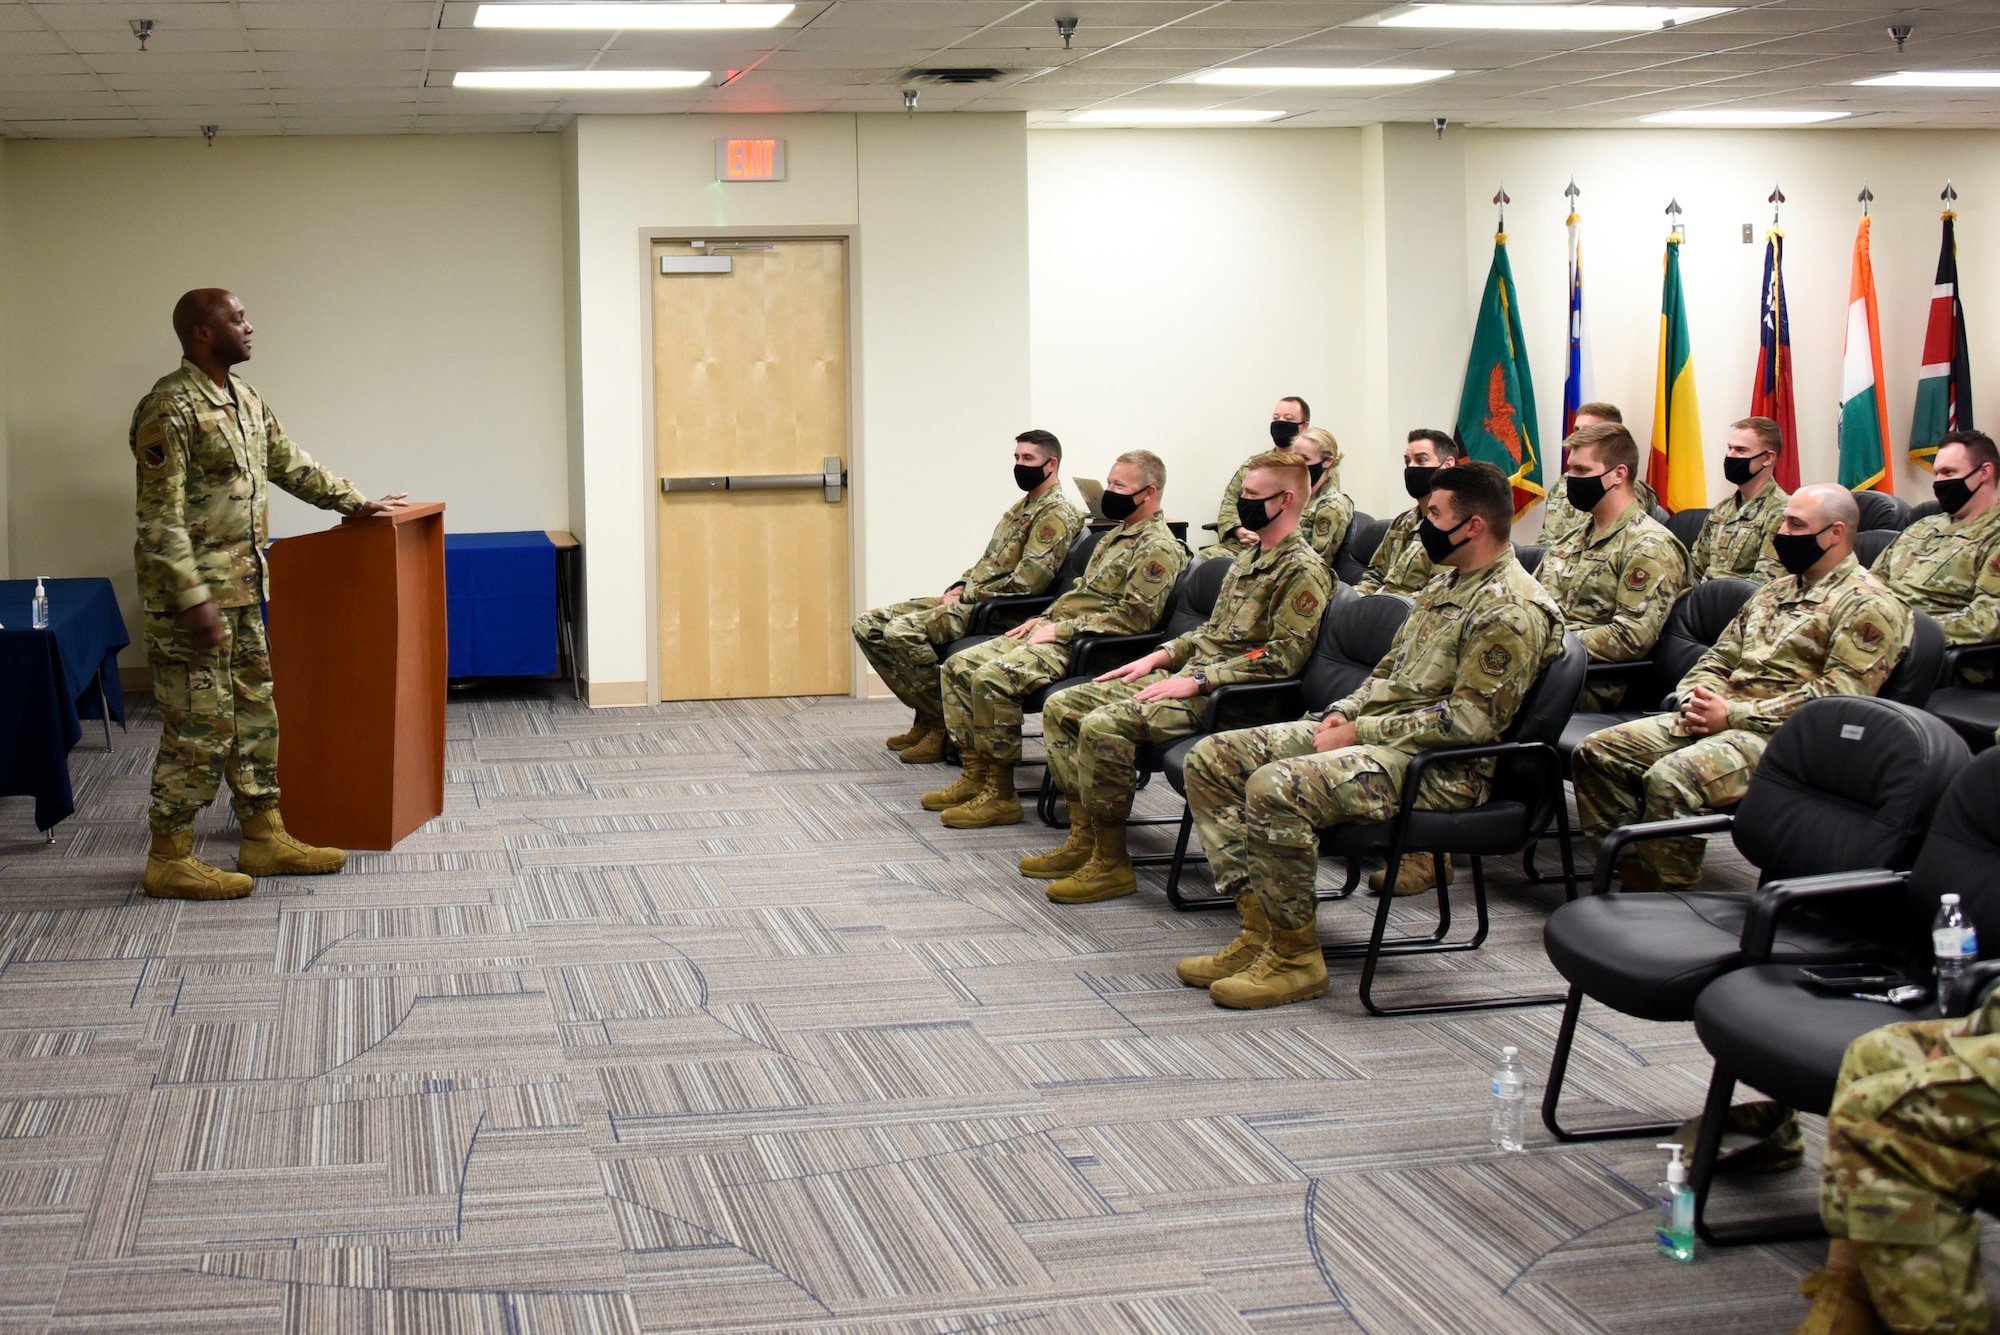 Brig. Gen. Kenyon Bell, 82nd Training Wing commander, speaks during an Aircraft Maintenance Officers Course graduation ceremony at Sheppard Air Force Base, Texas, April 22, 2021.